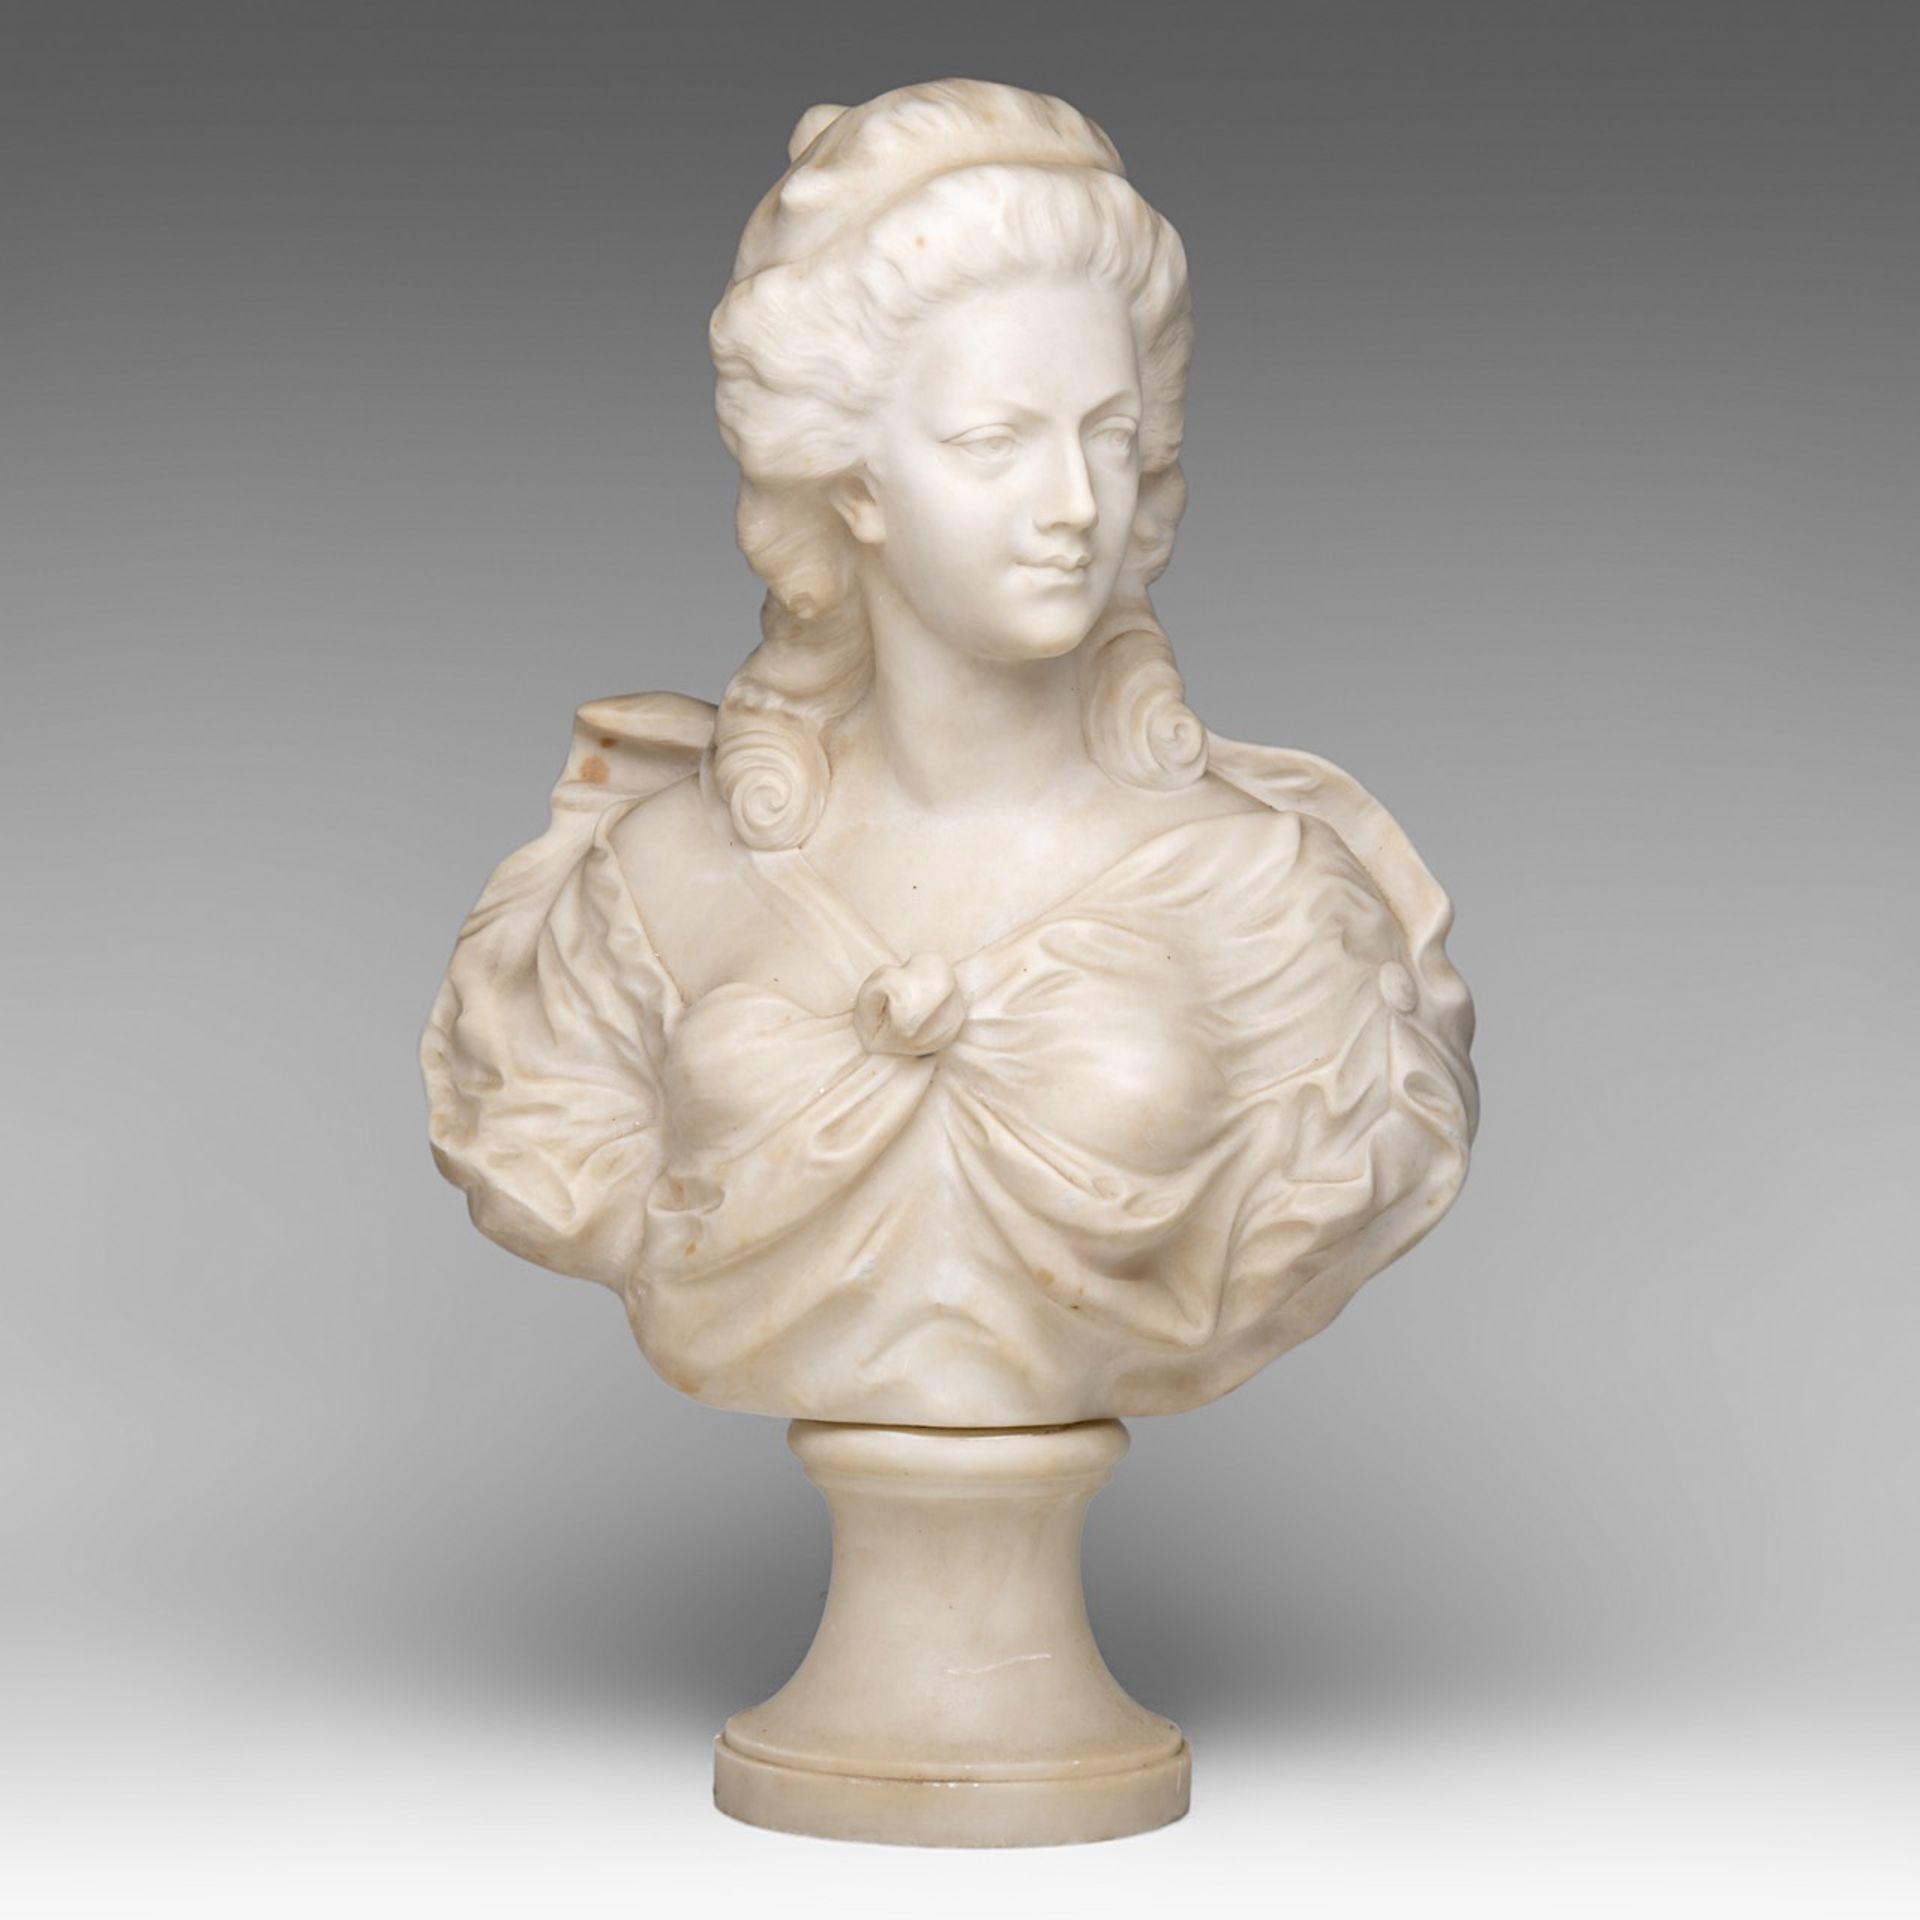 An alabaster bust of a female beauty in the Louis XVI era (Marie-Antoinette?), H 56 cm